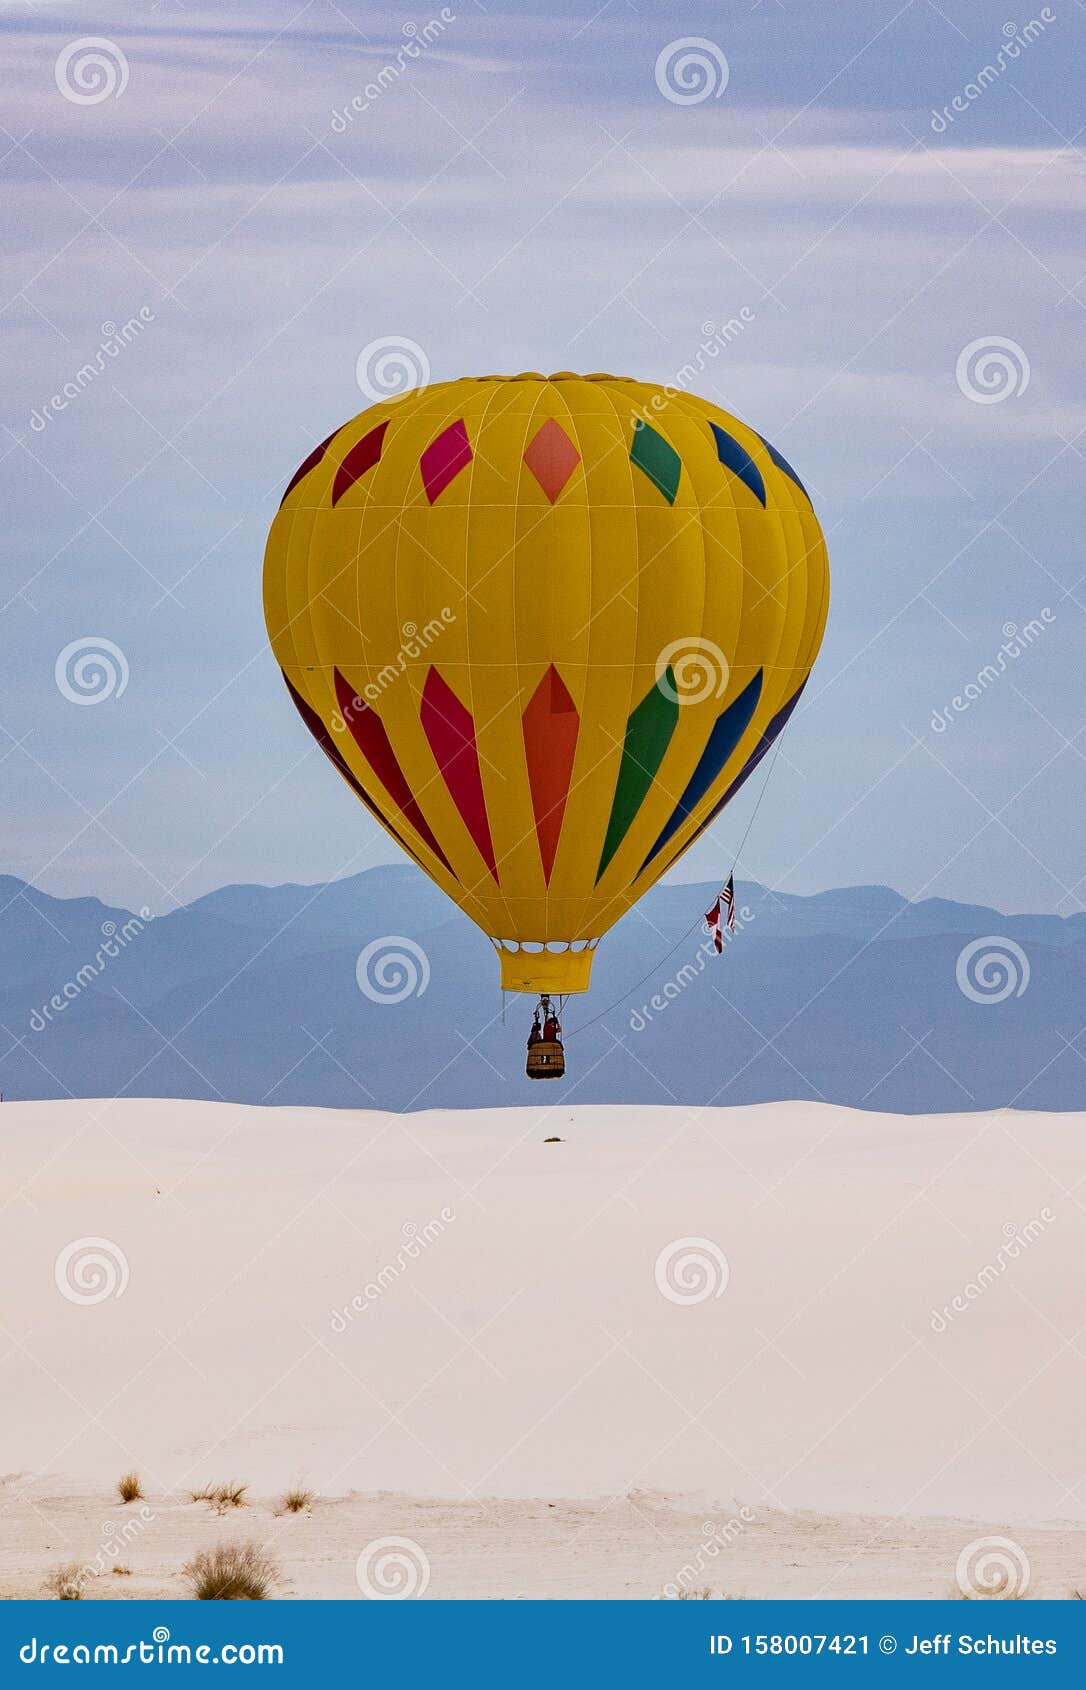 Balloon In Flight At White Sands Editorial Photo Image Of Mexico White 158007421